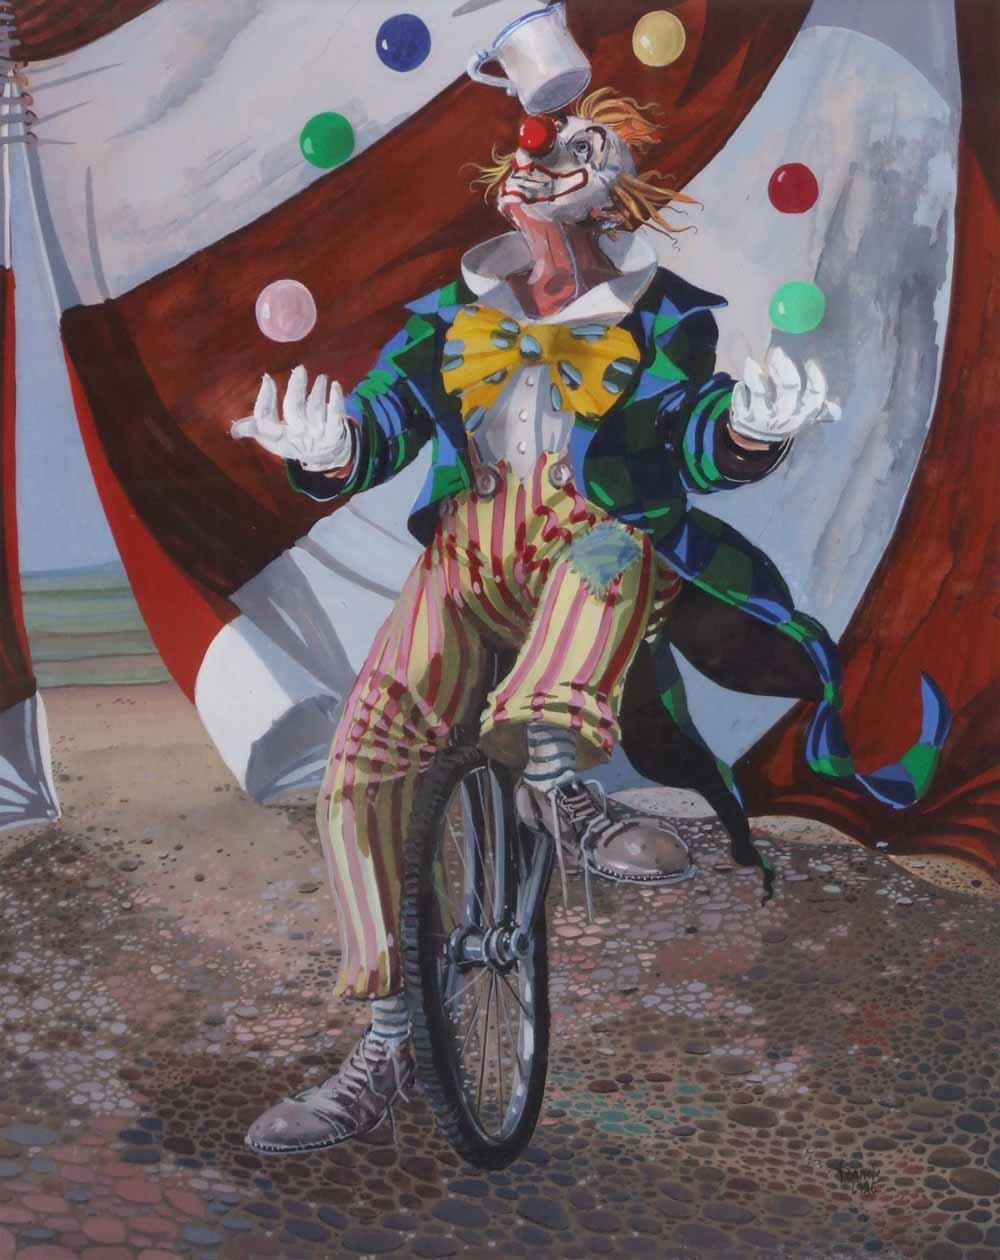 A juggling clown on a unicycle by Francis Wainwright, 1986